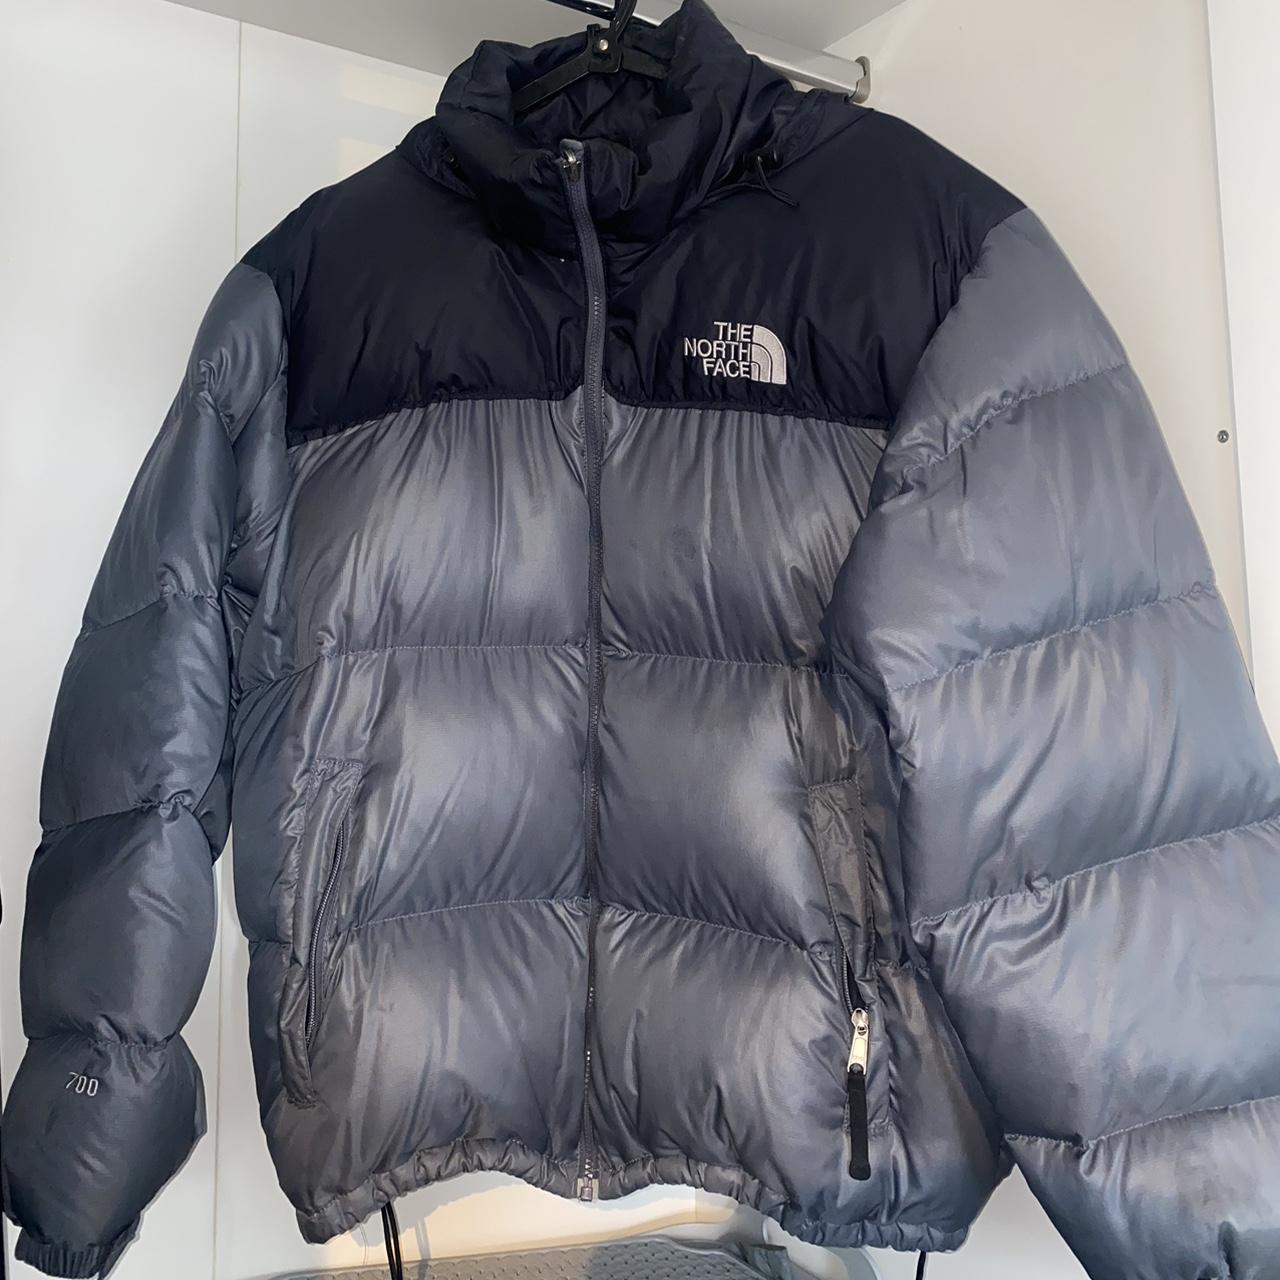 Retro, The North Face 700 nuptial puffer Jacket Size... - Depop